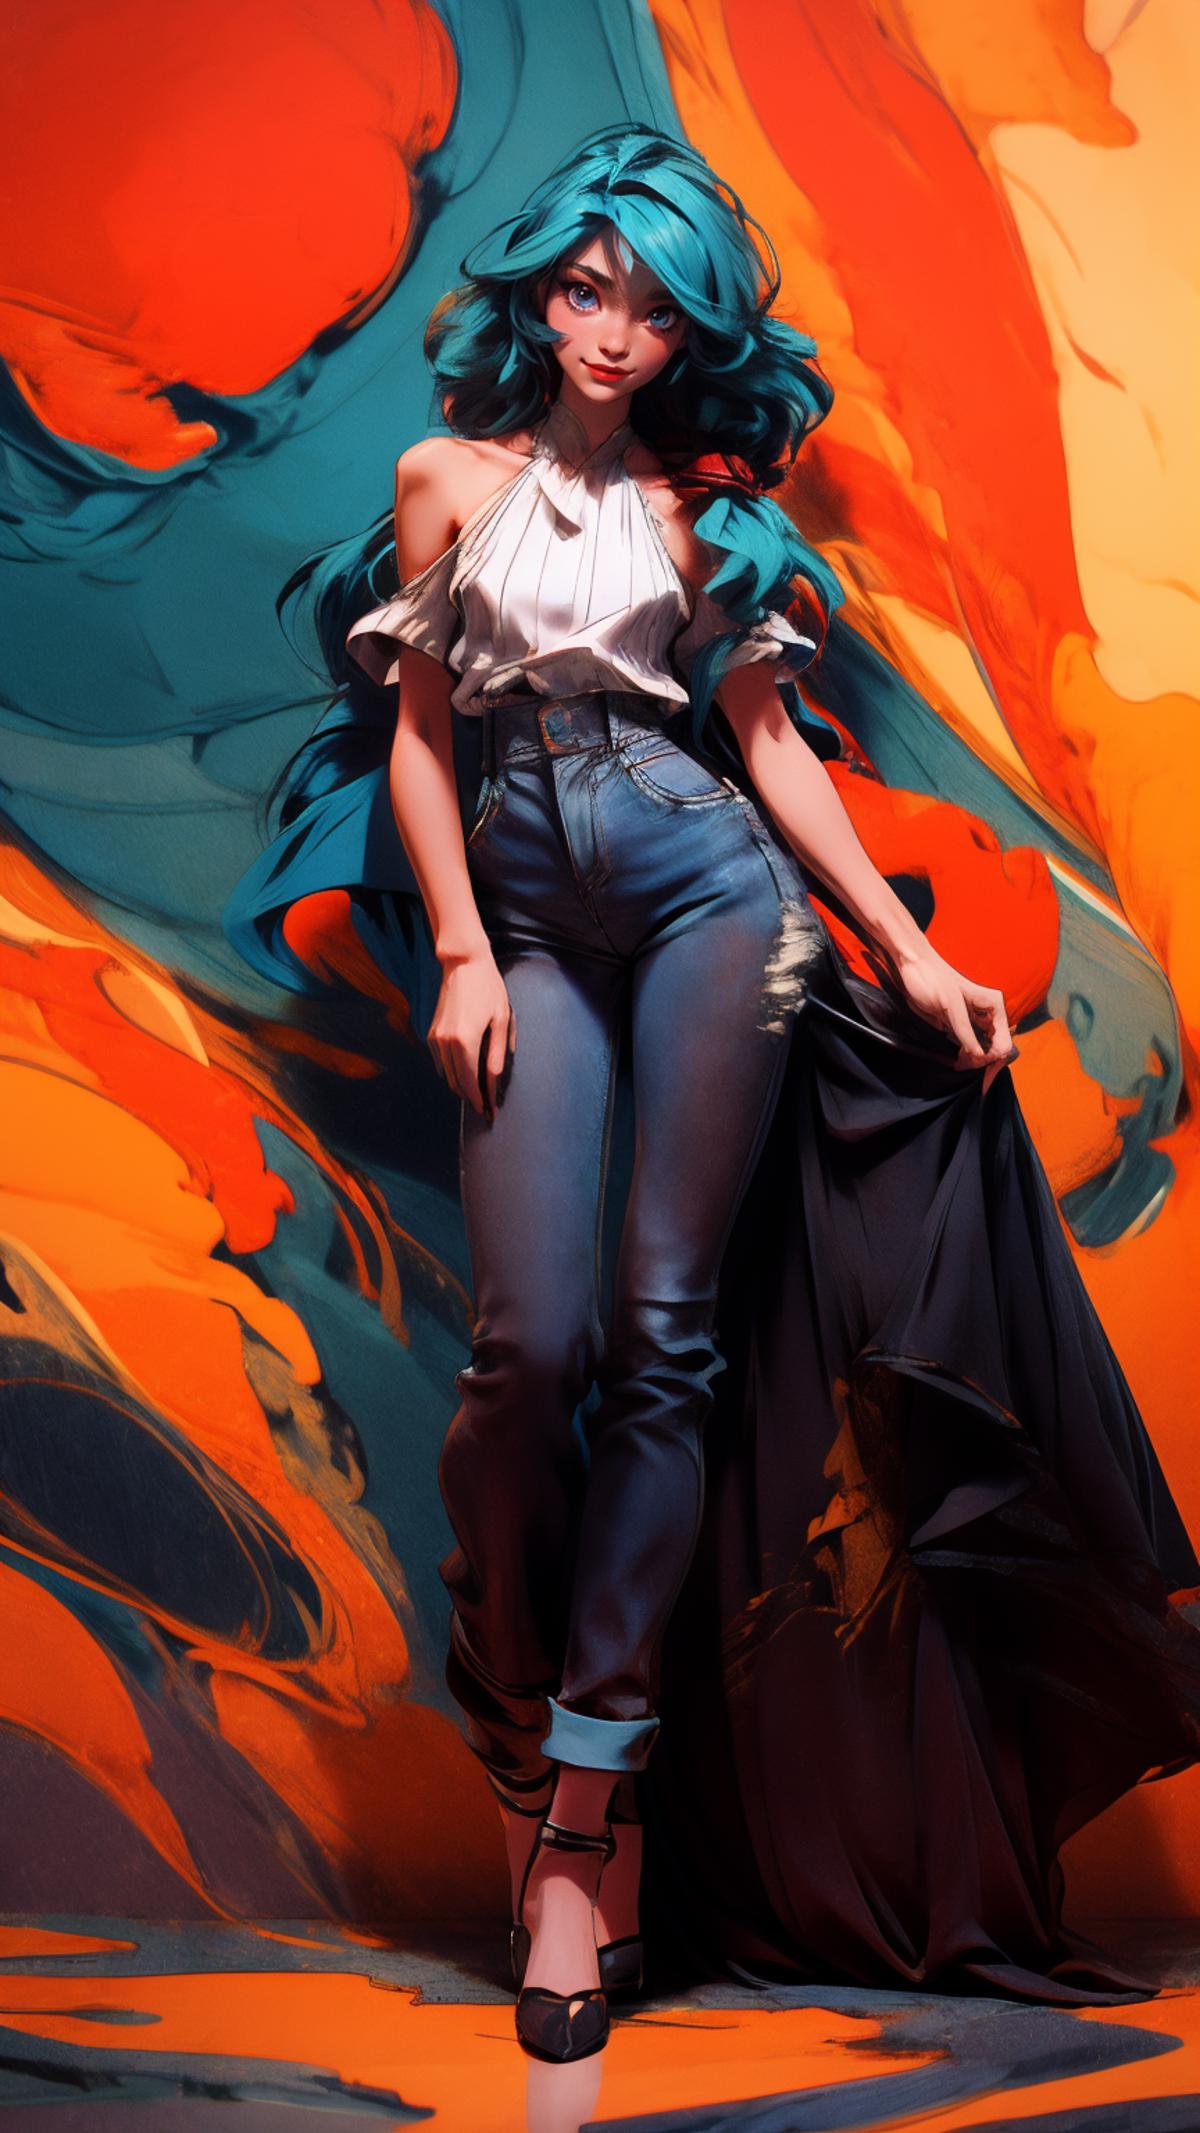 Artistic Illustration of a Woman in Blue Jeans and a White Shirt.